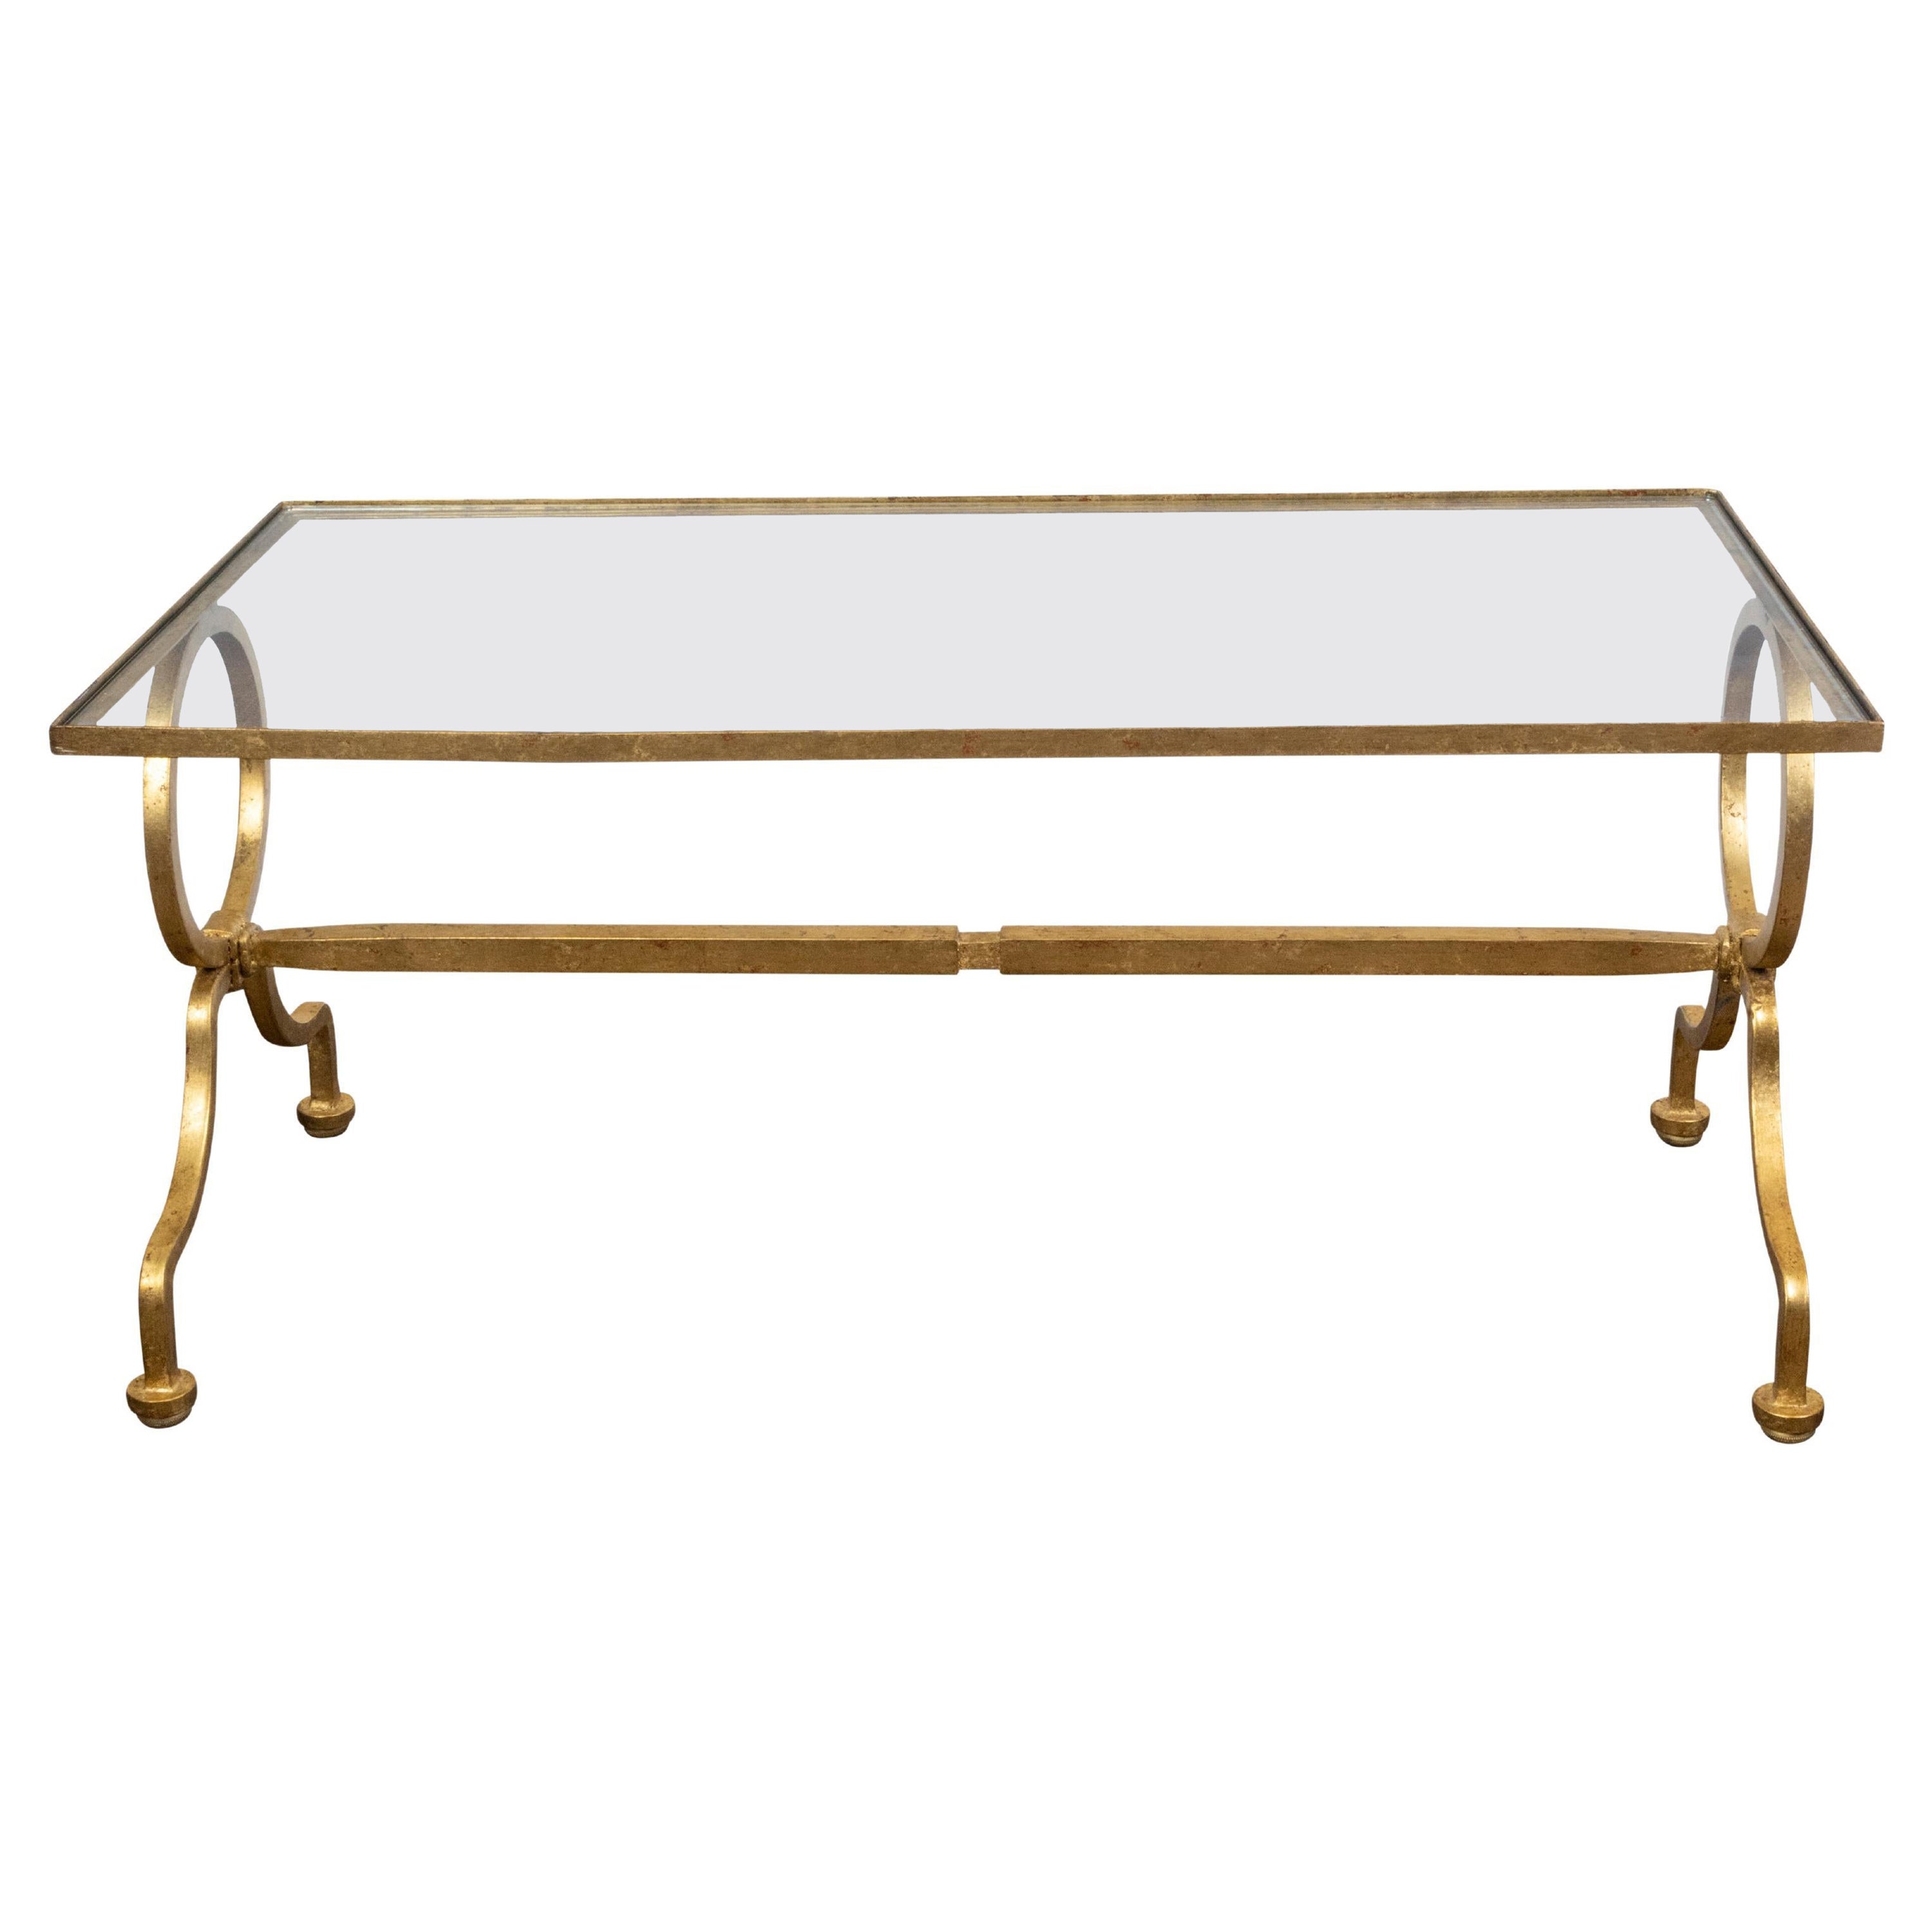 Italian Midcentury Gilt Iron Coffee Table with Glass Top and Large Rings For Sale